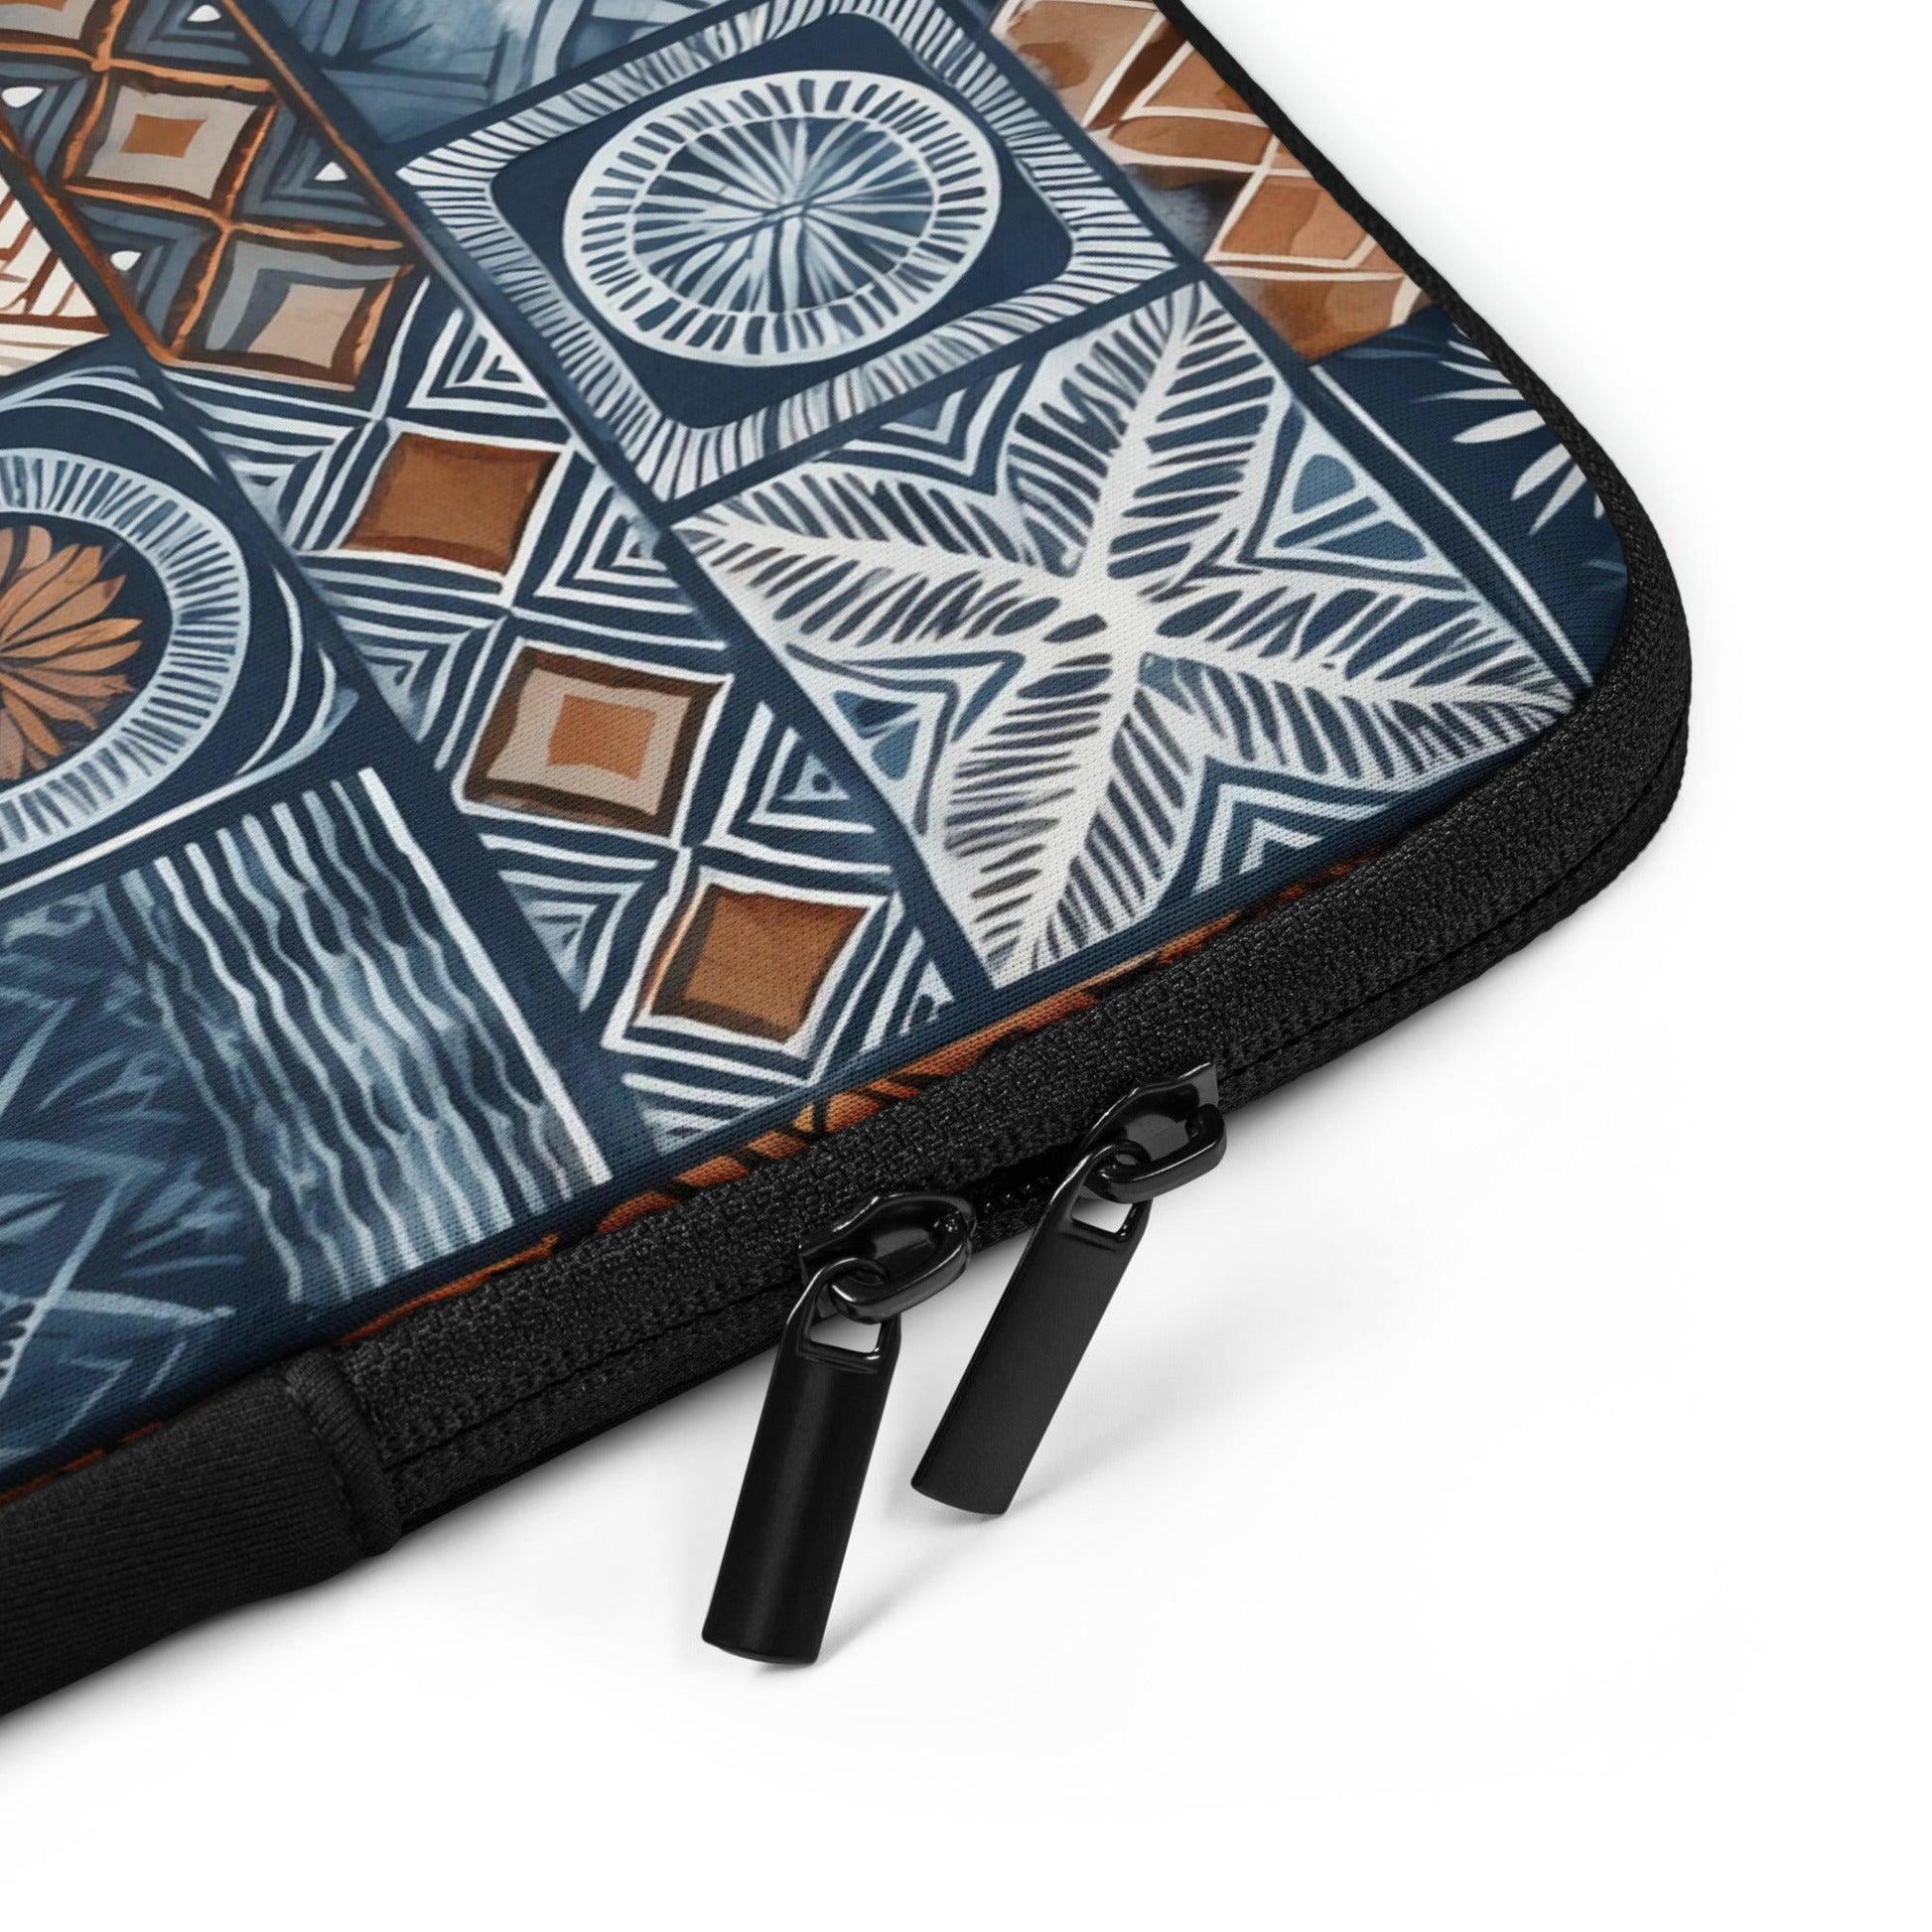 Pacific Islands Tapa Cloth Laptop Case - The Global Wanderer